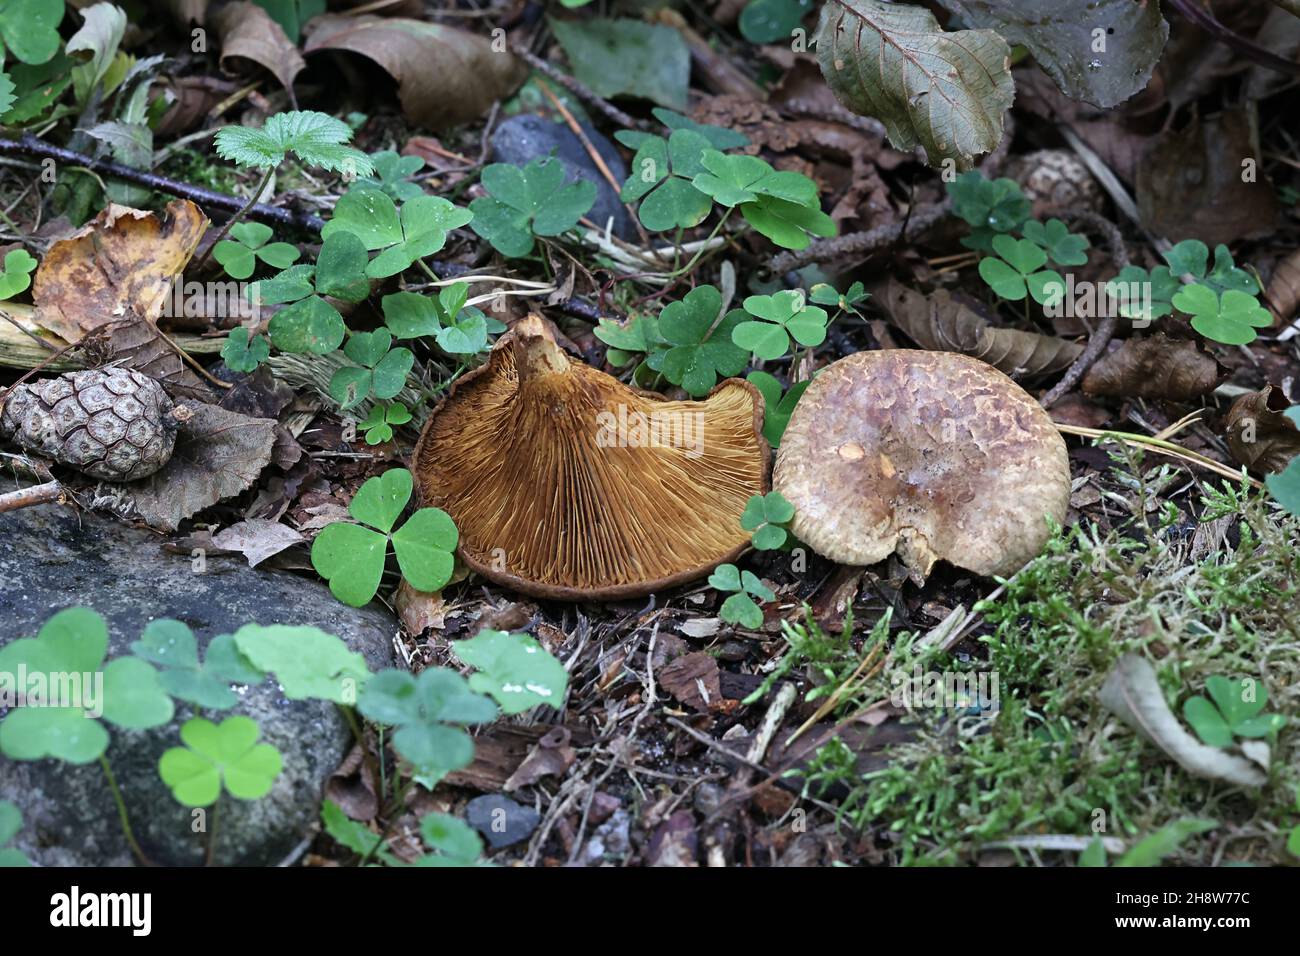 Paxillus filamentosus, also called Paxillus rubicundulus, commonly known as alder roll-rim, wild mushroom from Finland Stock Photo